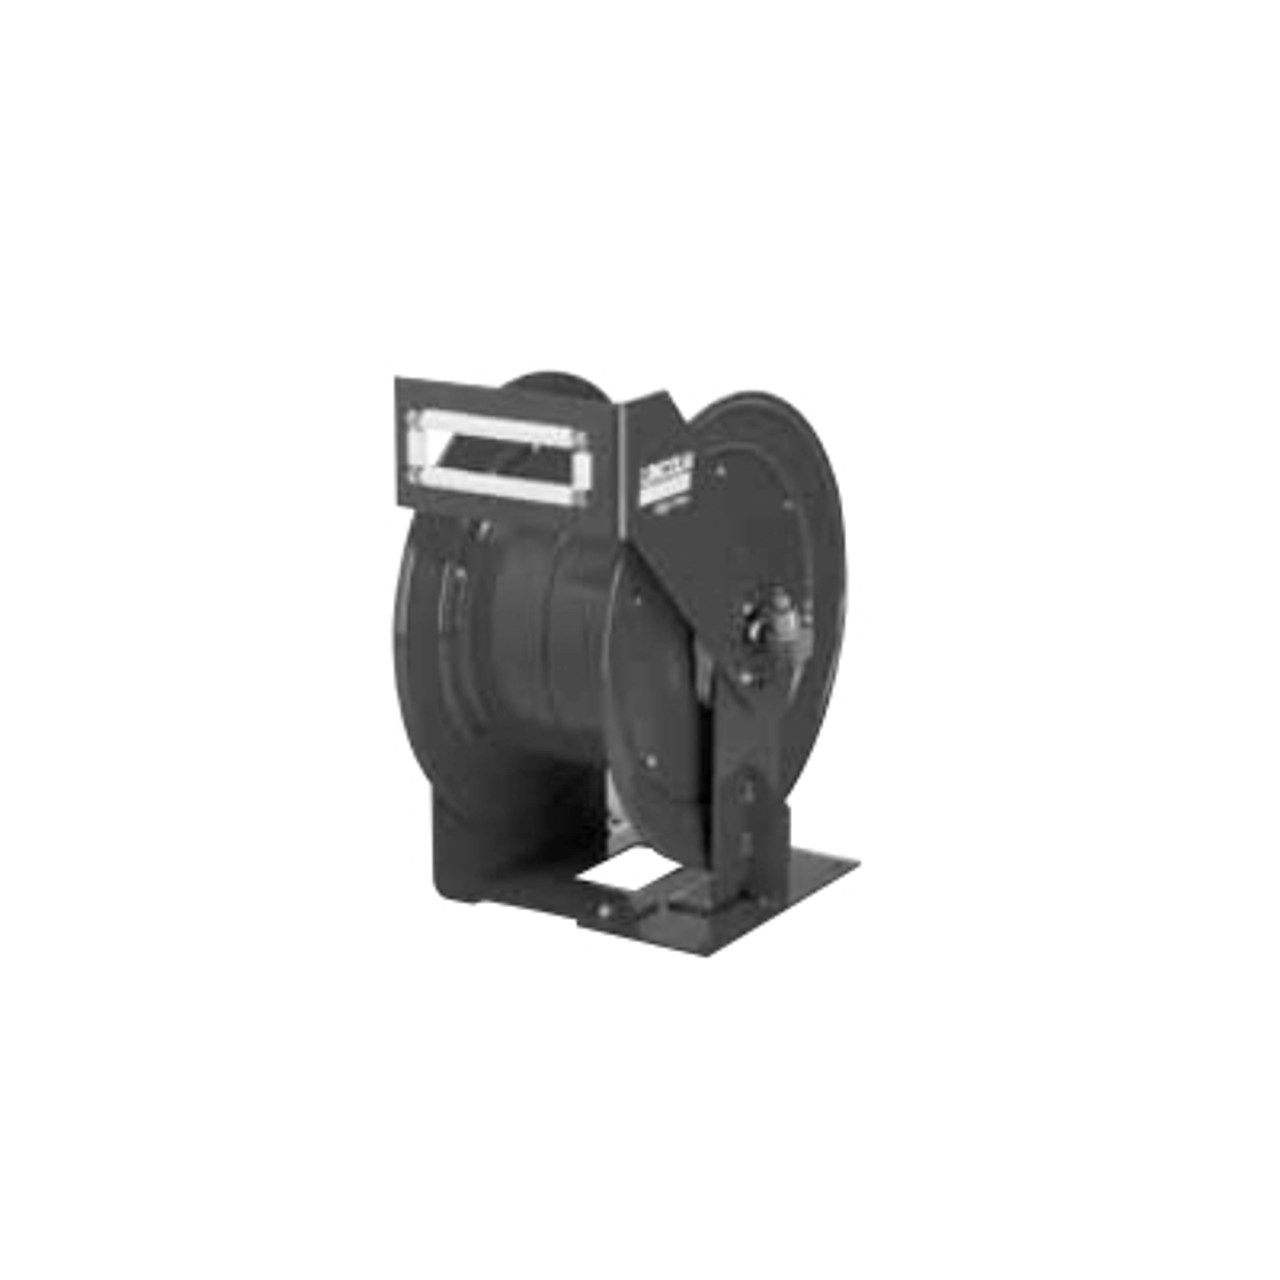 Lincoln Extra-Heavy-Duty Large Capacity High Pressure High Flow Reel 75 ft.  with 1/2 in. NPTF Inlet - 84275